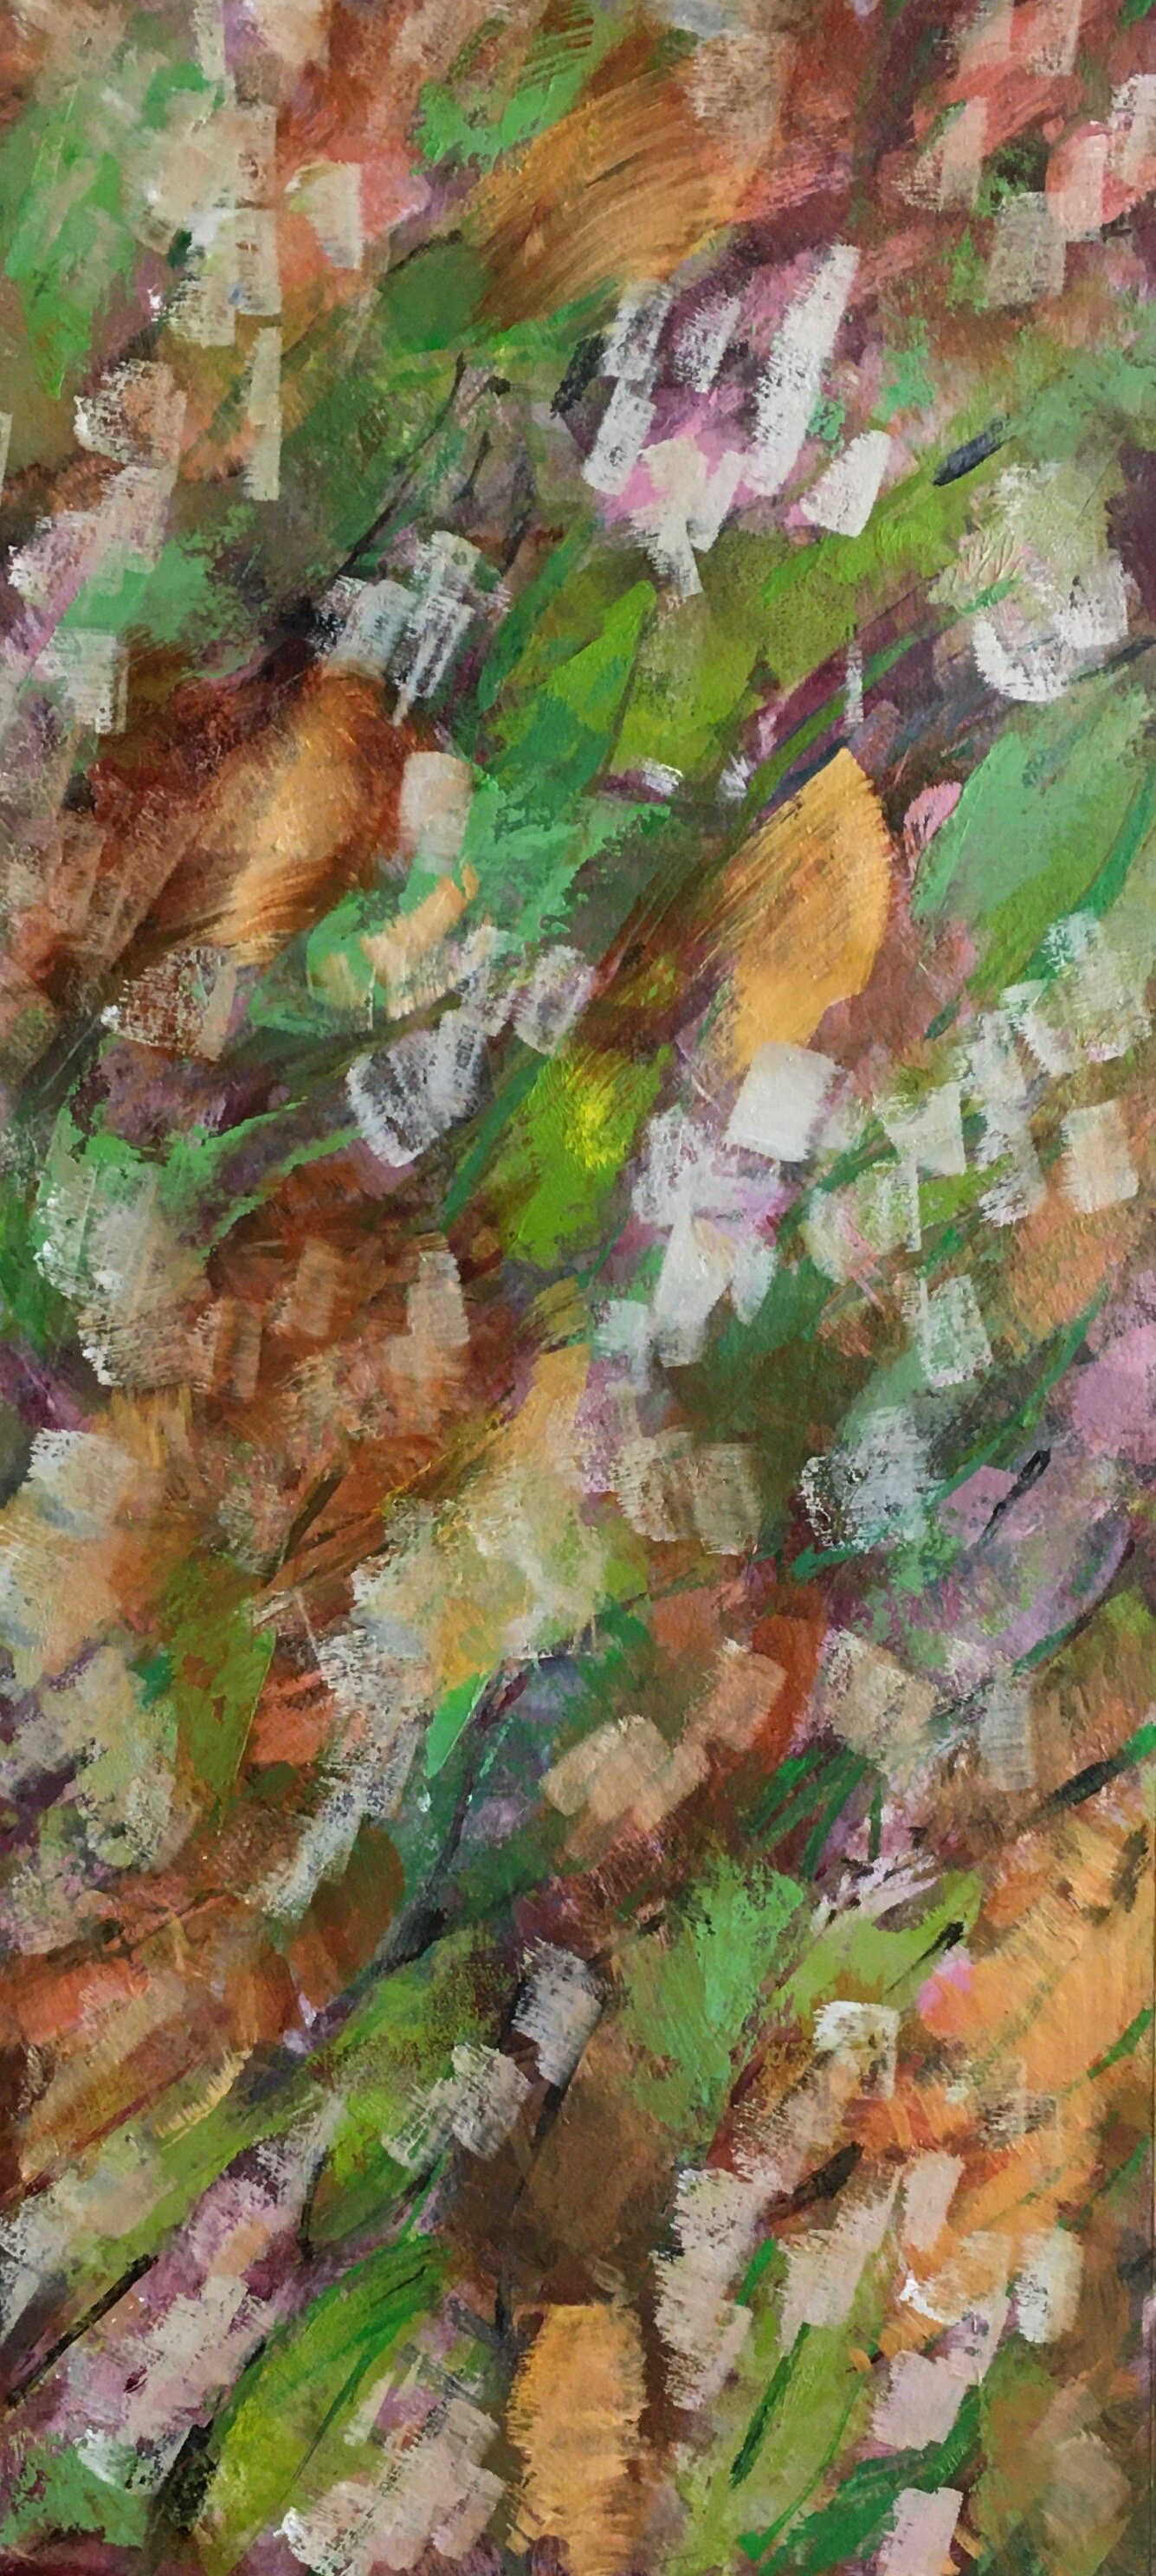 Petals and Leaves, Oil on Paper,6 by 15 inches, 2020.